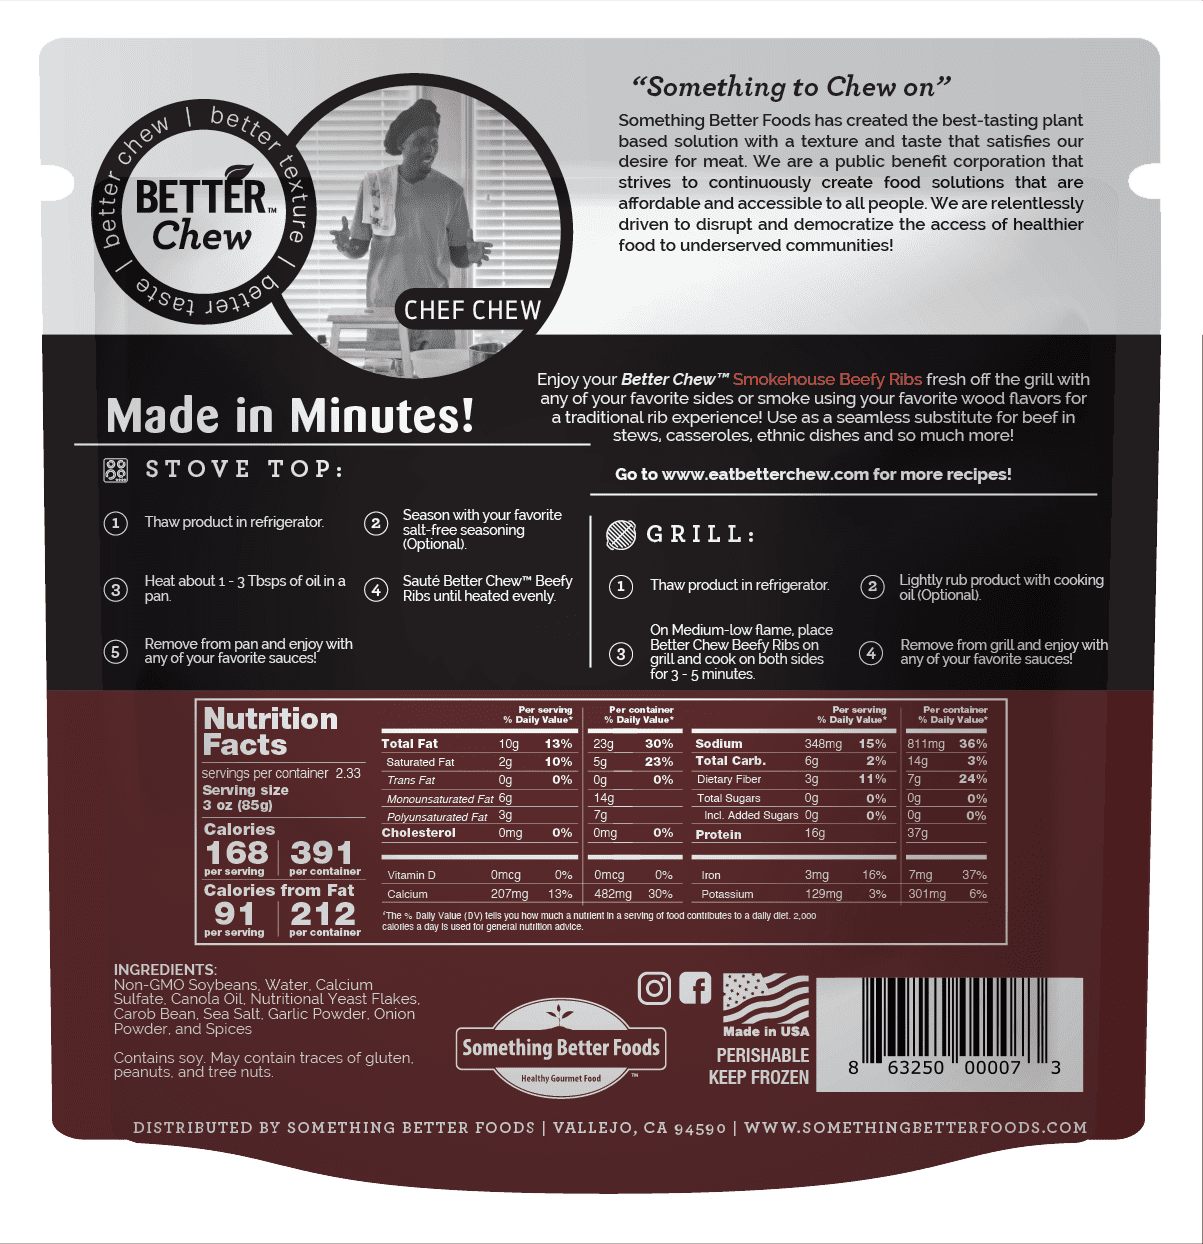 Better Chew, Plant-Based Smokehouse Beefy Ribs 7oz (Frozen)